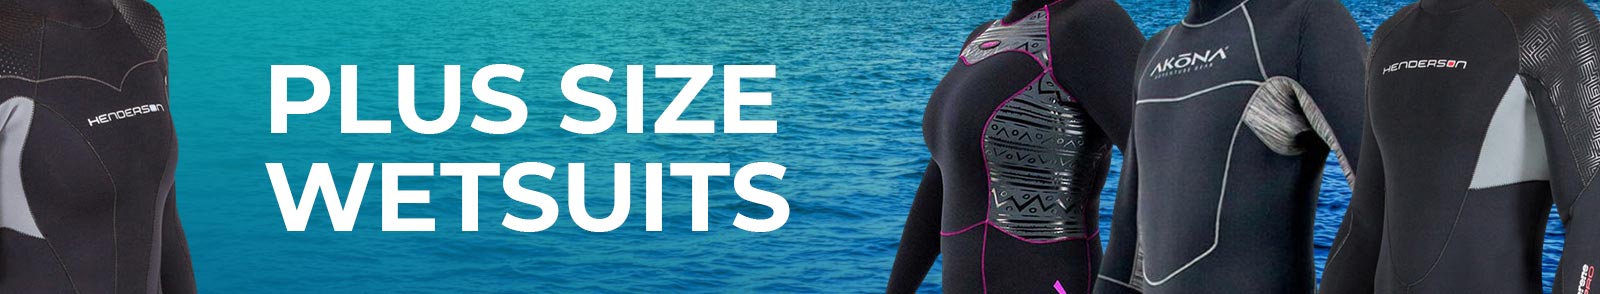 Plus Size Wetsuits for Women - Big and Tall Wetsuits for Men